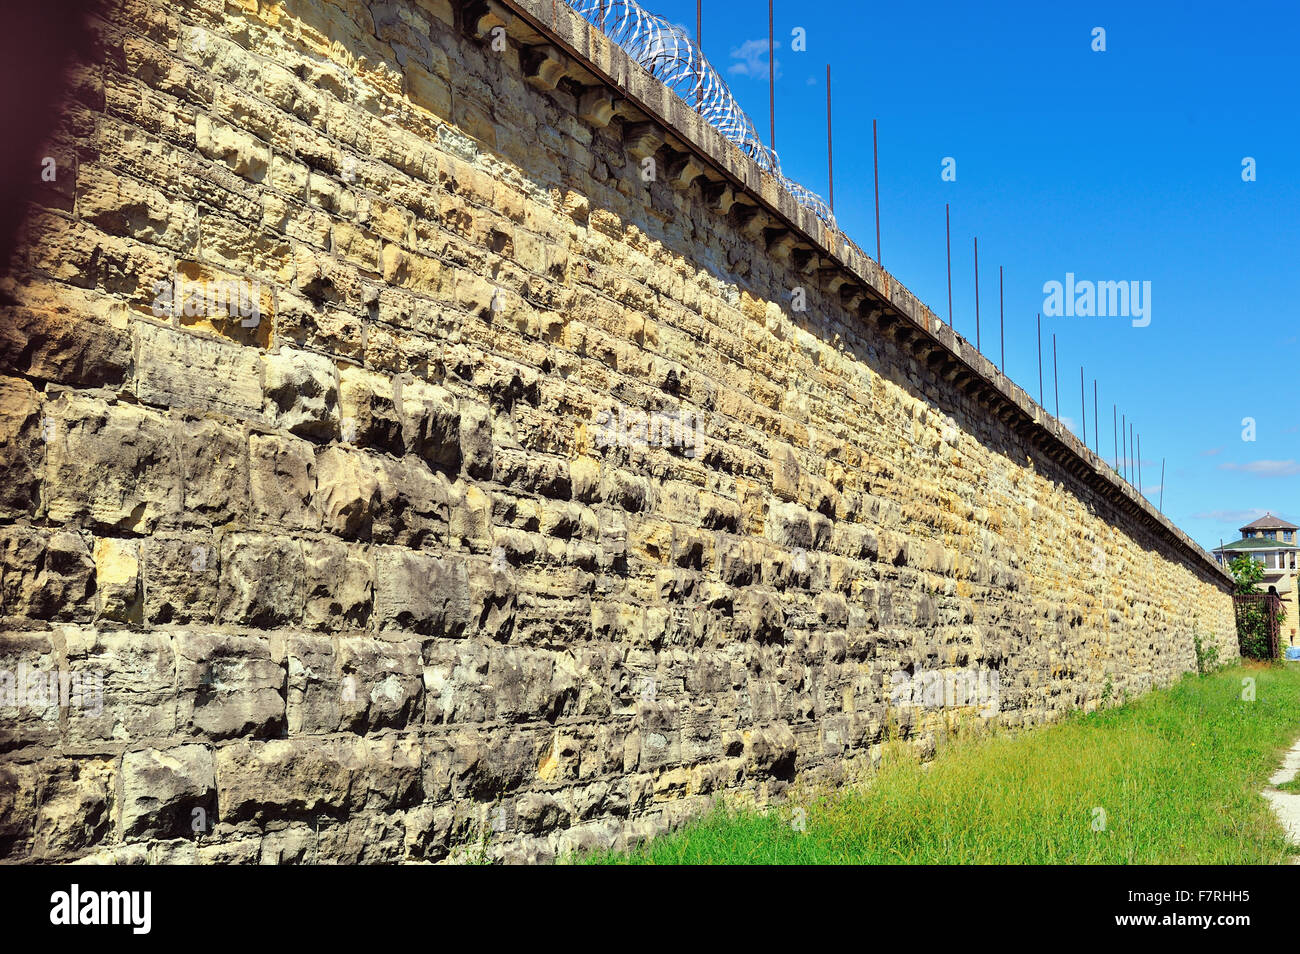 Wall and distant guard tower at the Joliet Correctional Center (also known as Illinois State Penitentiary and Joliet Prison). Joliet, Illinois, USA. Stock Photo